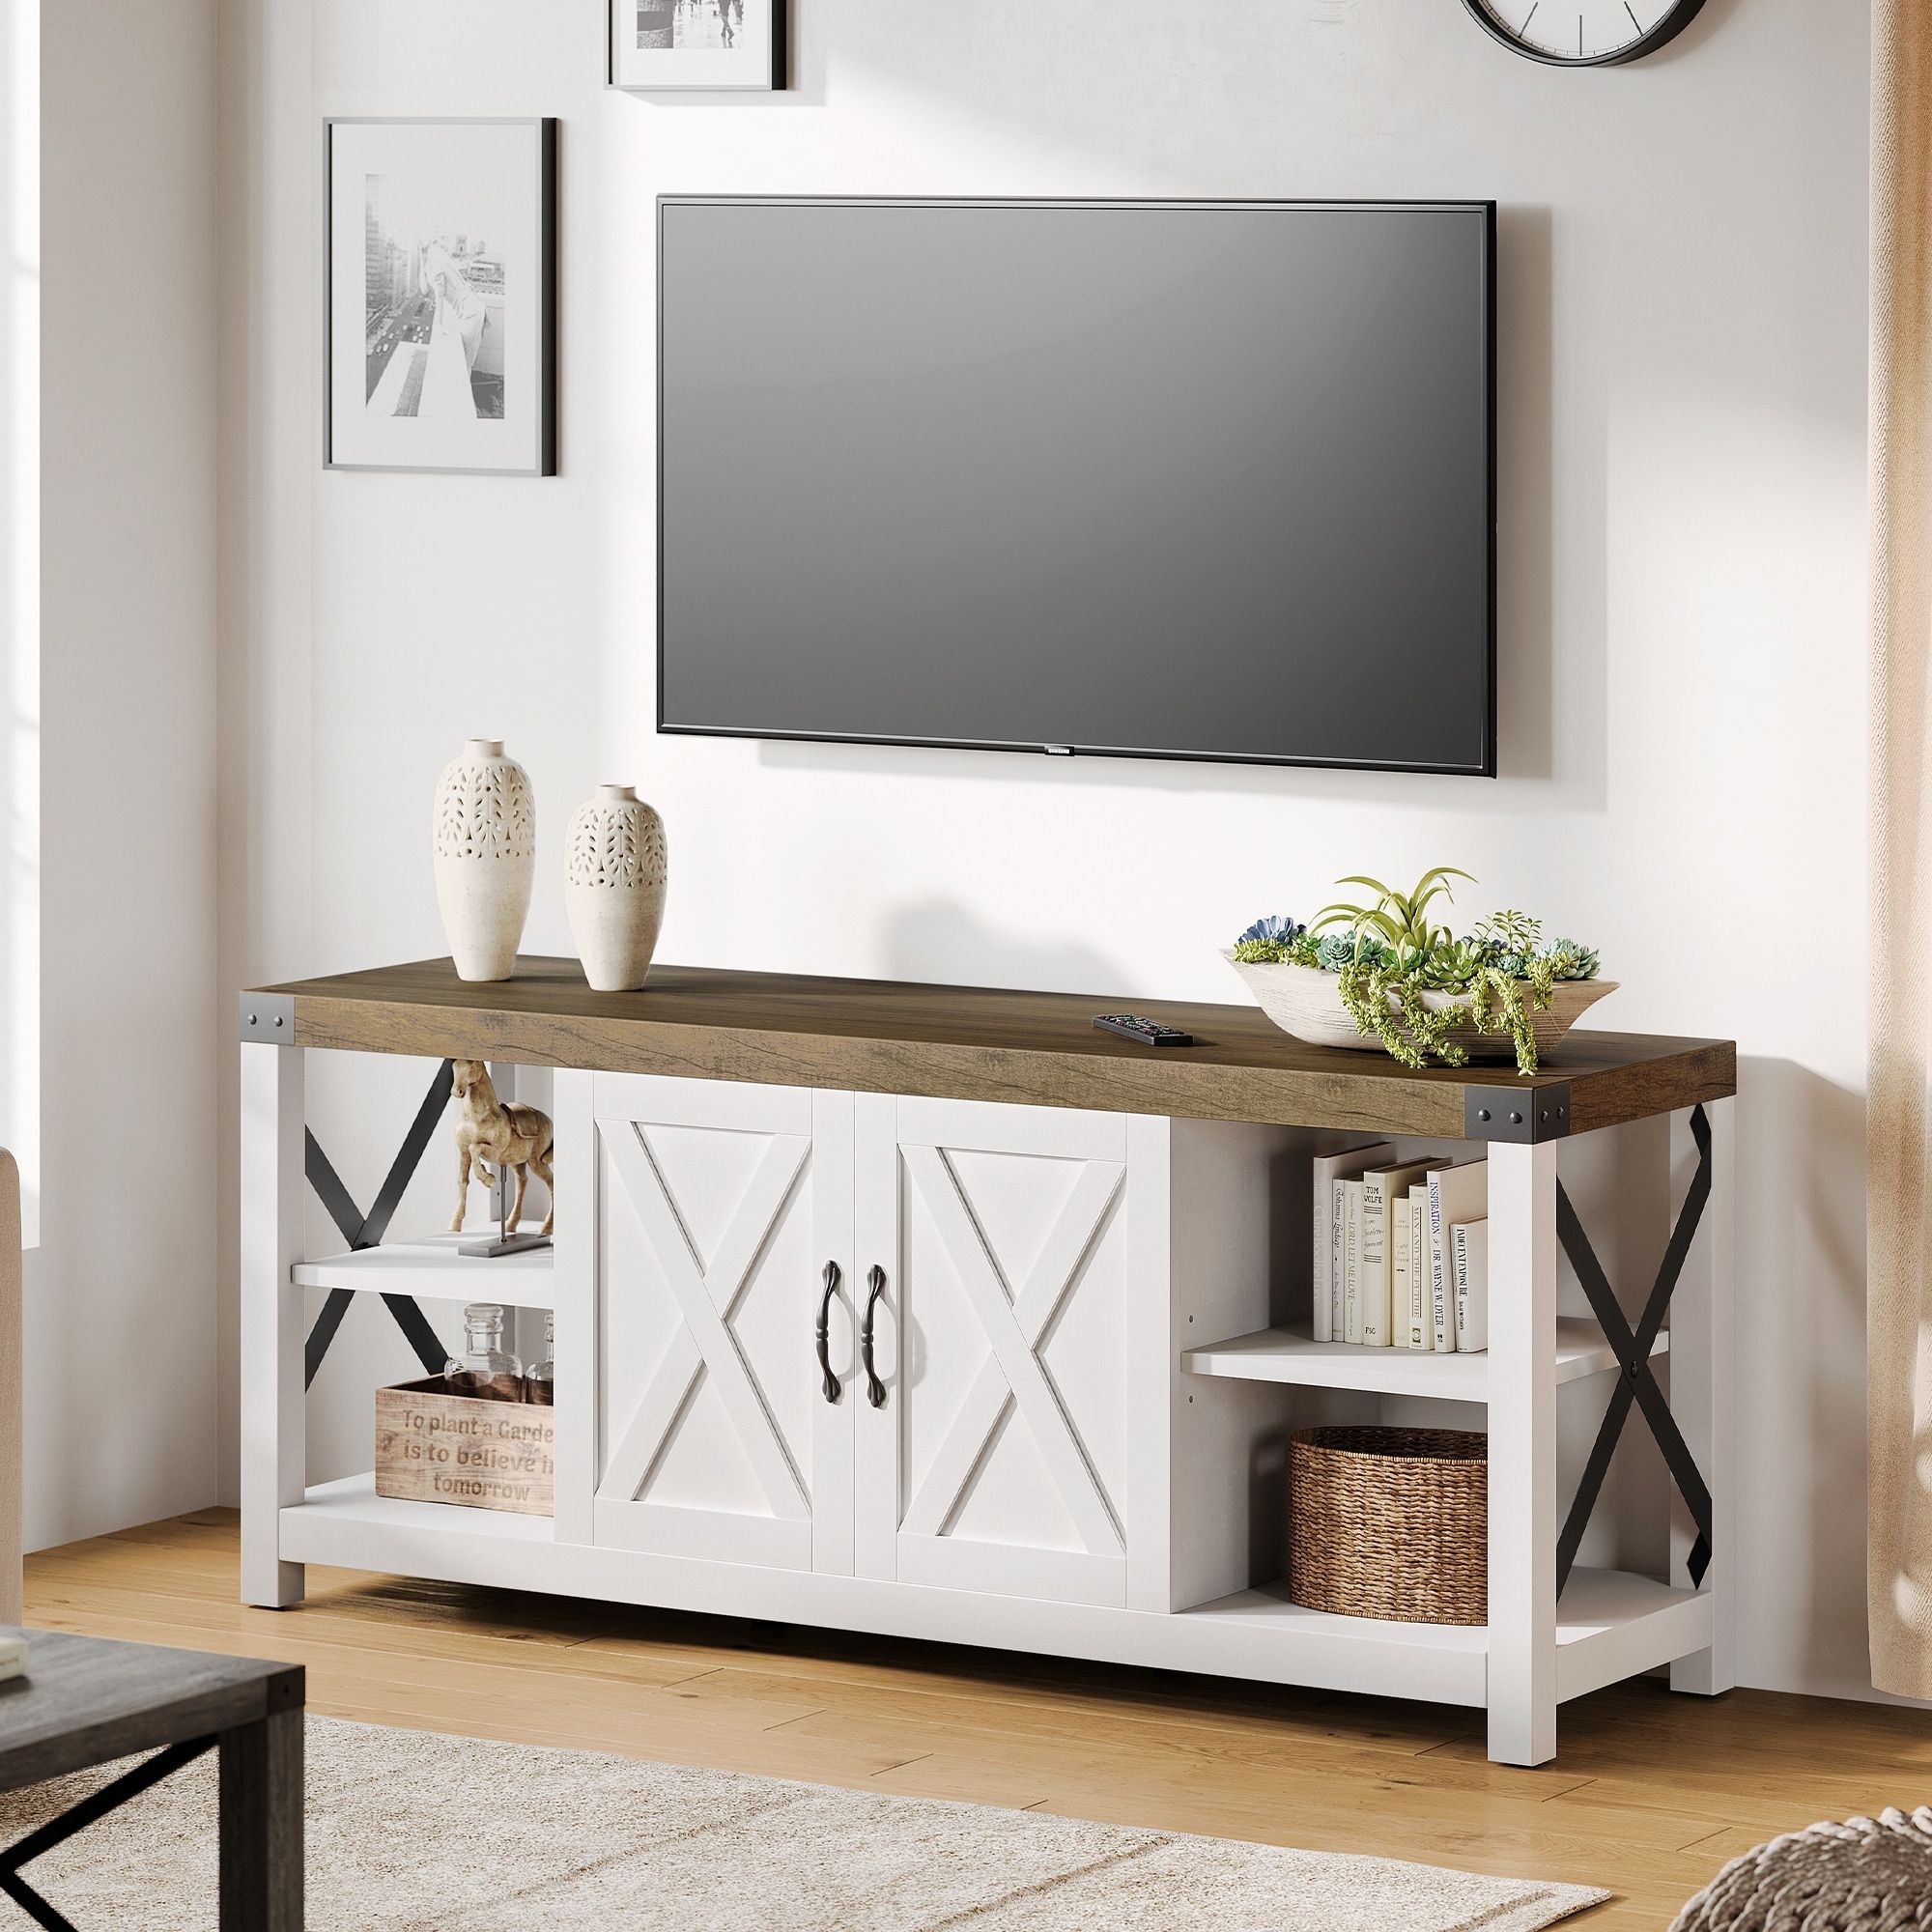 59 Inch Tv Stand For Tv Up To 50 60 65 Inches, Farmhouse Wood Tv Cabinet  Entertainment Center – 59" – On Sale – Bed Bath & Beyond – 36742172 Pertaining To Farmhouse Stands For Tvs (View 10 of 15)